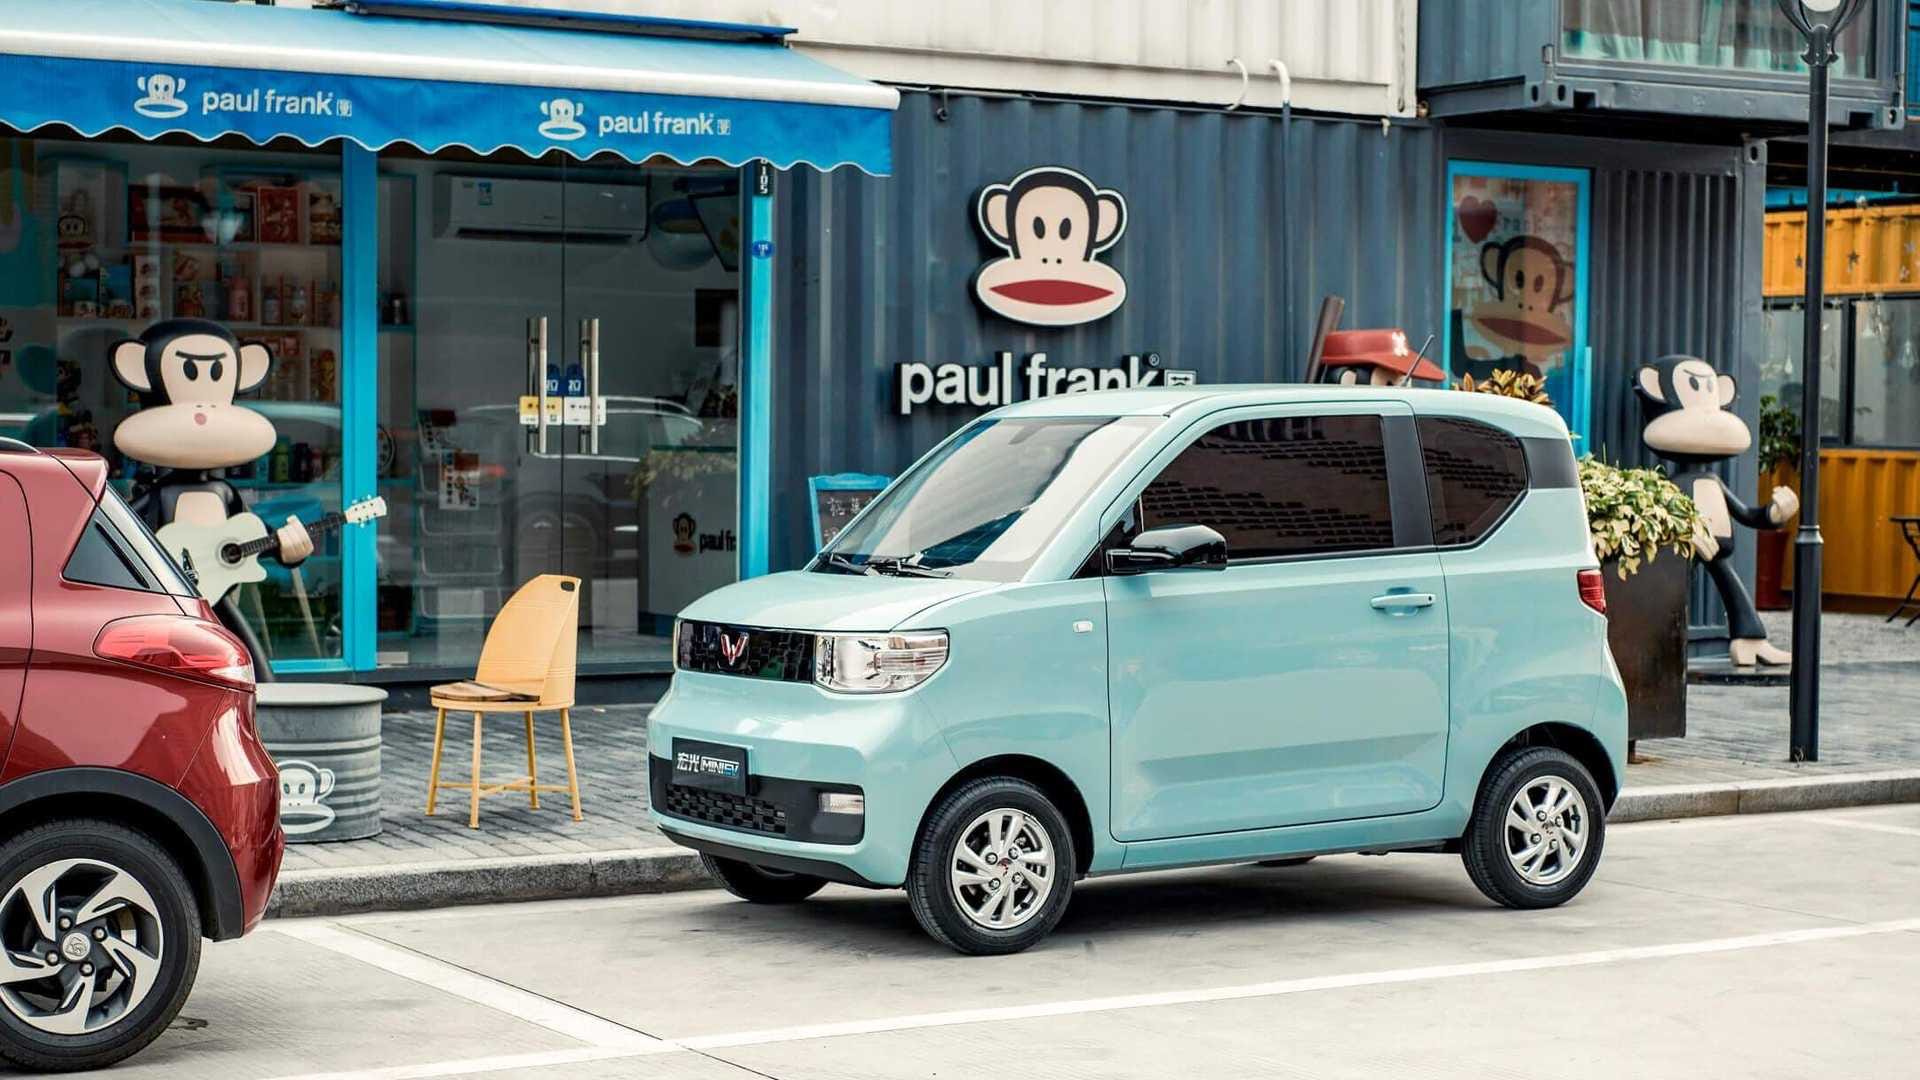 China’s Best Selling EV Is Only $5k and Has a Range of 100 Miles